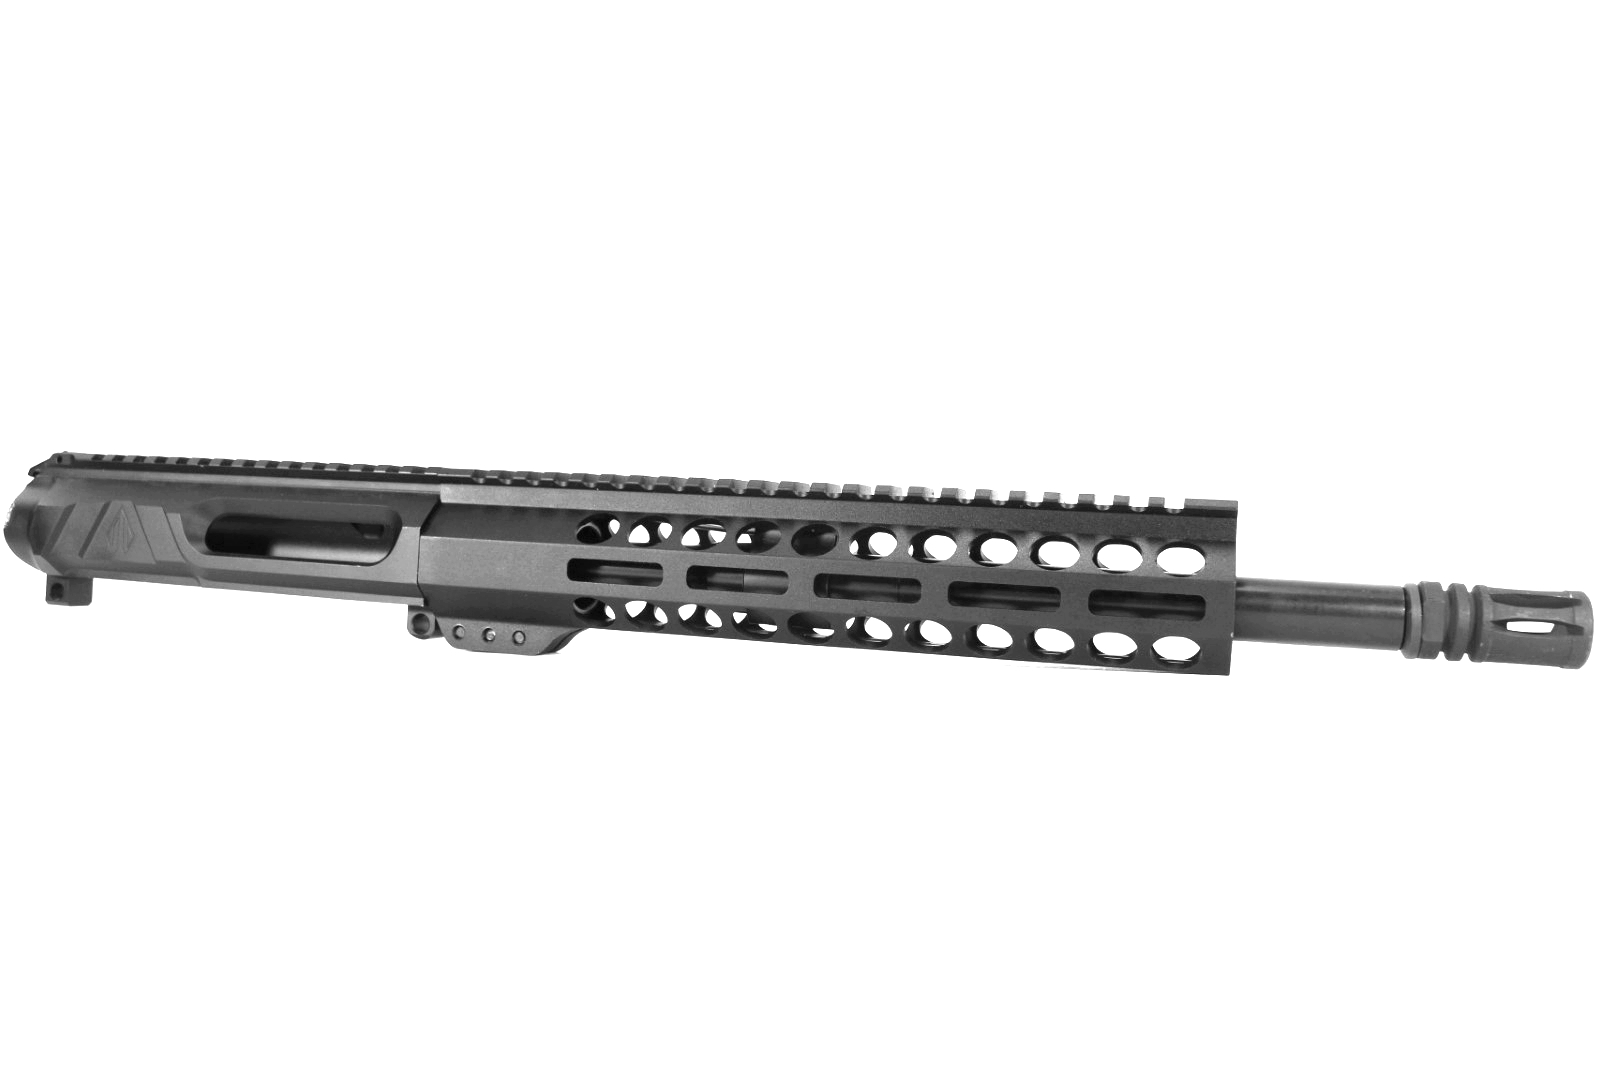 12.5 inch AR-15 Non Reciprocating Side Charging 350 LEGEND Melonite Upper